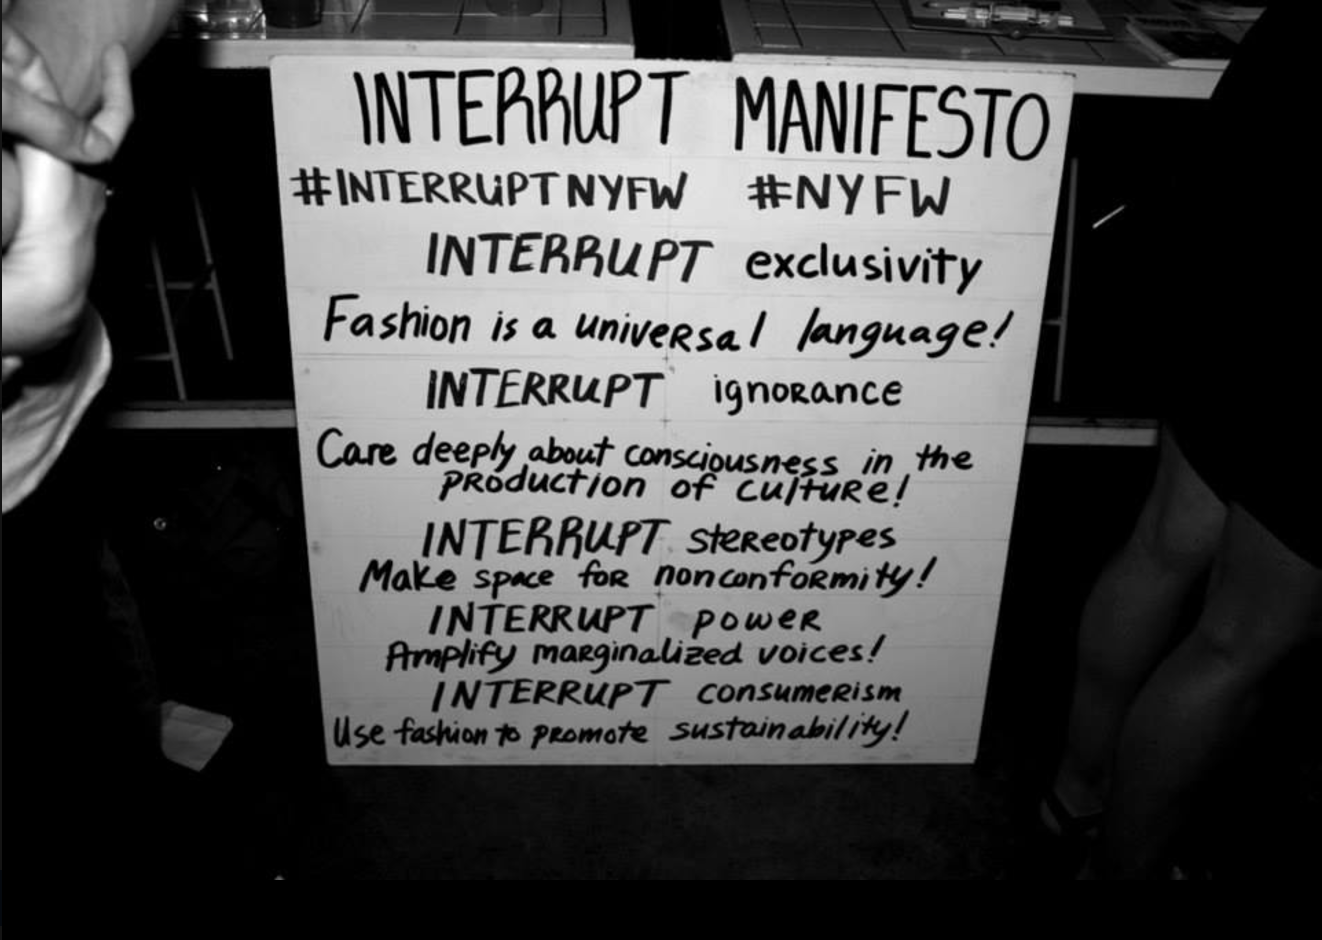  On the first day of Fashion Week, we hosted an #InterruptNYFW party in Chelsea, sponsored by Milagro Tequila, Modelo, and Cafe Presidente. Attendance over 200+ with a mixed crowd of models, fashion week attendees, local artists, musicians, and activ